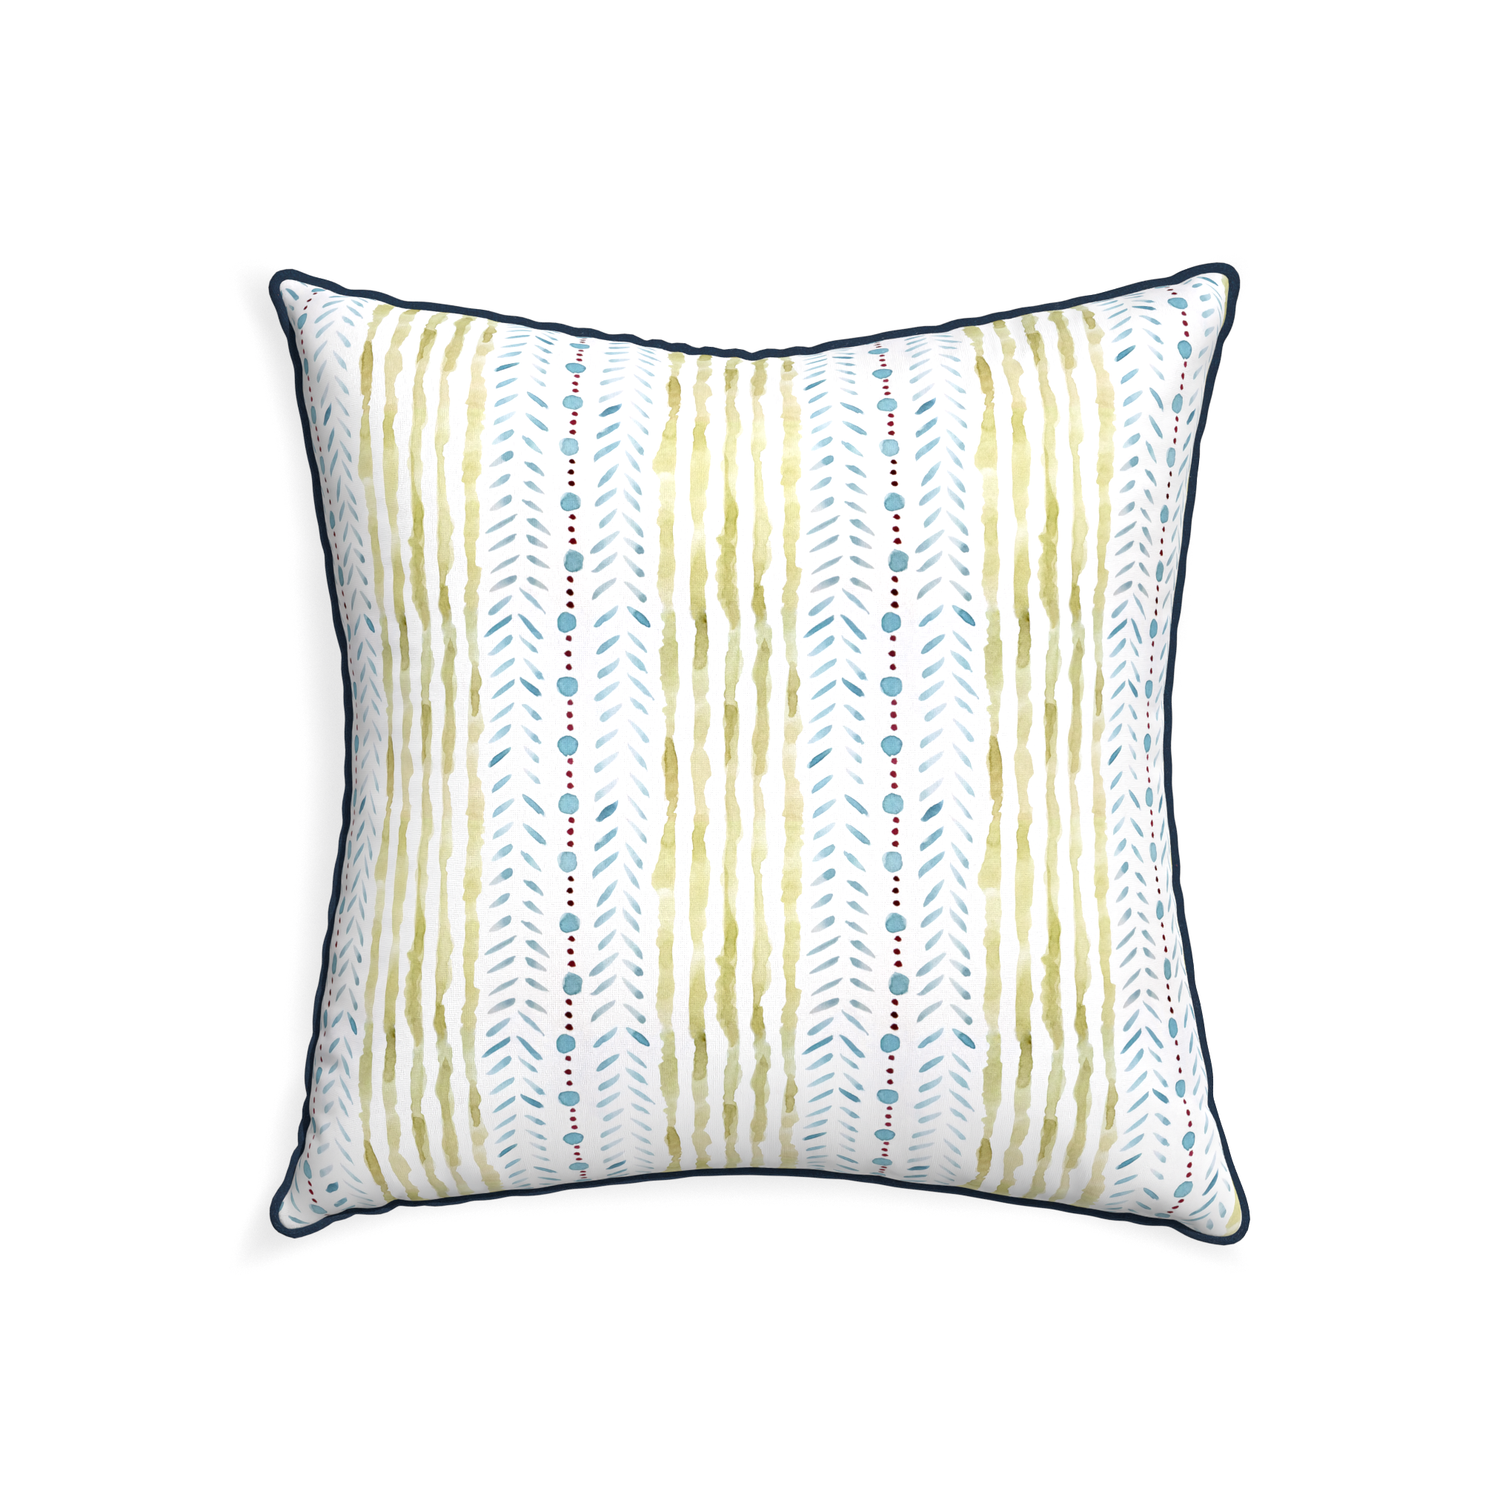 22-square julia custom blue & green stripedpillow with c piping on white background